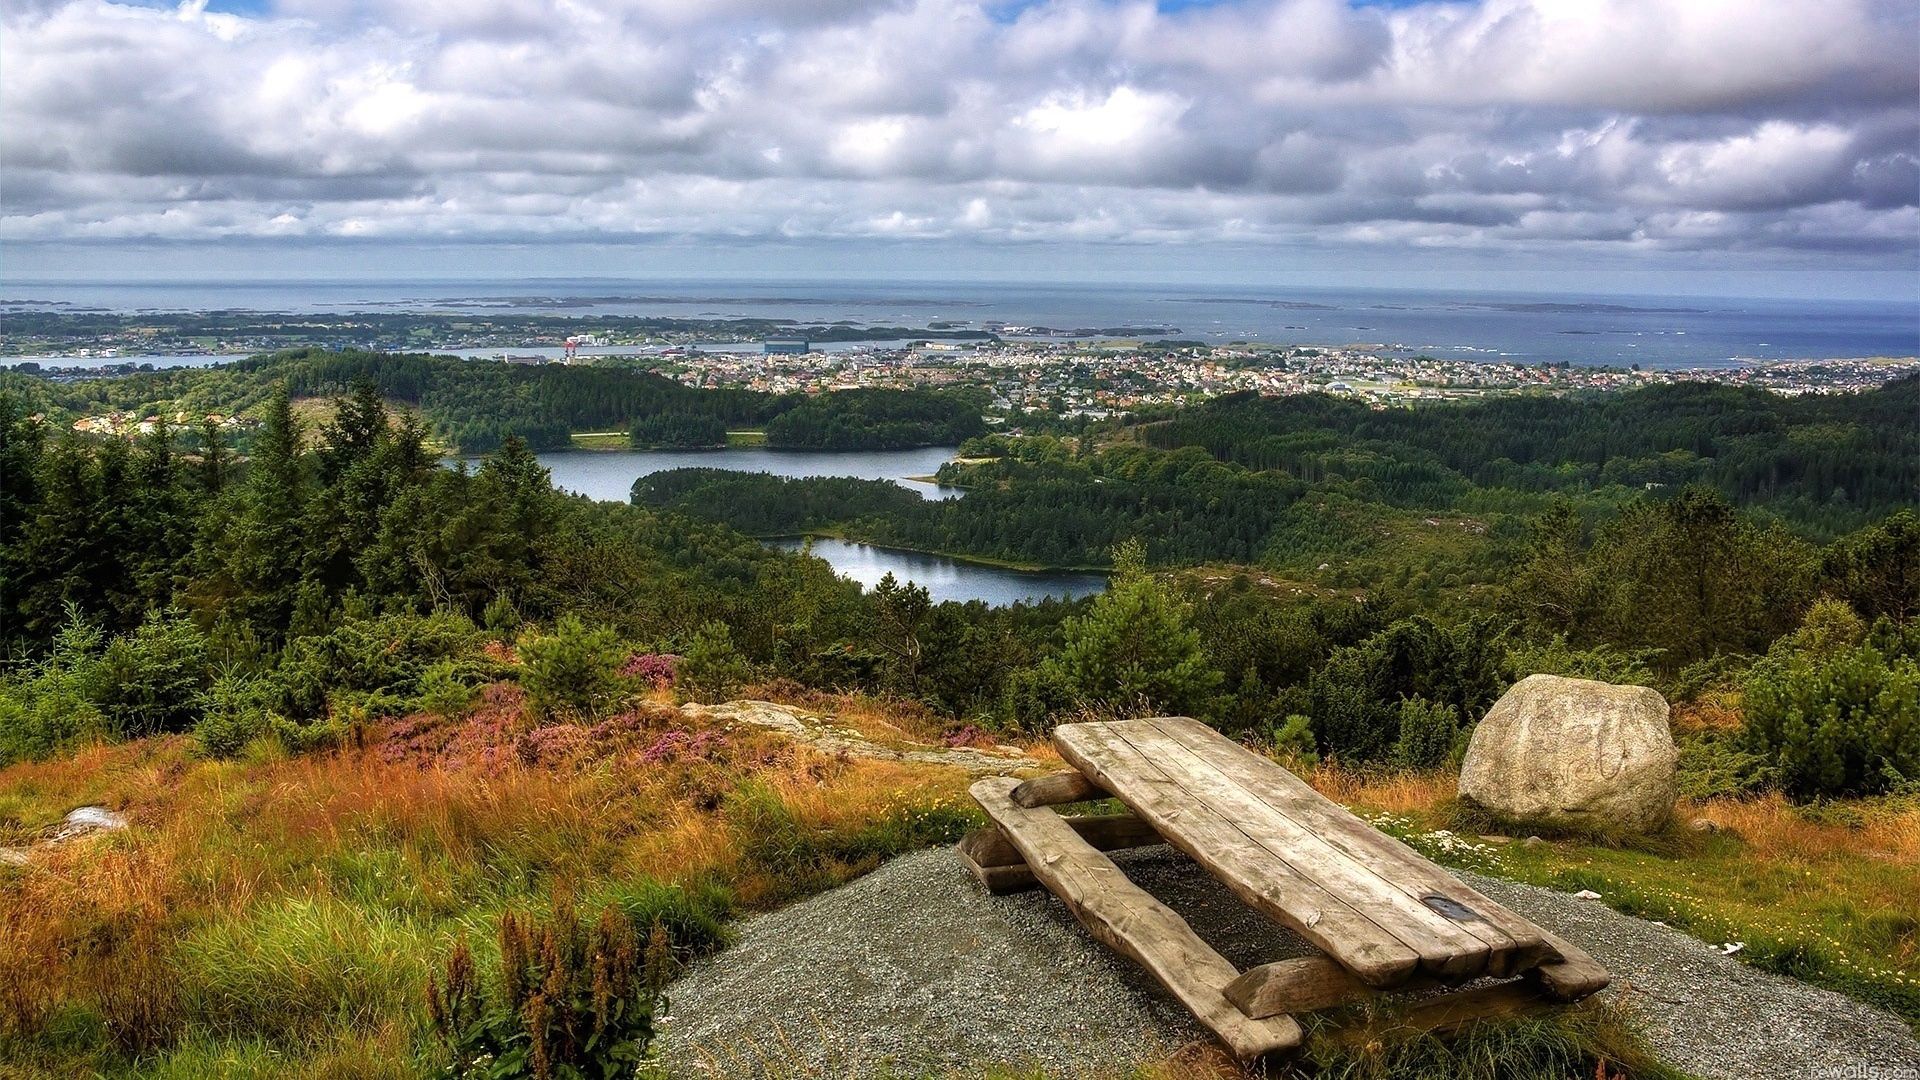 table, elevation, benches, nature, stones, city, forest, rise, view, islands